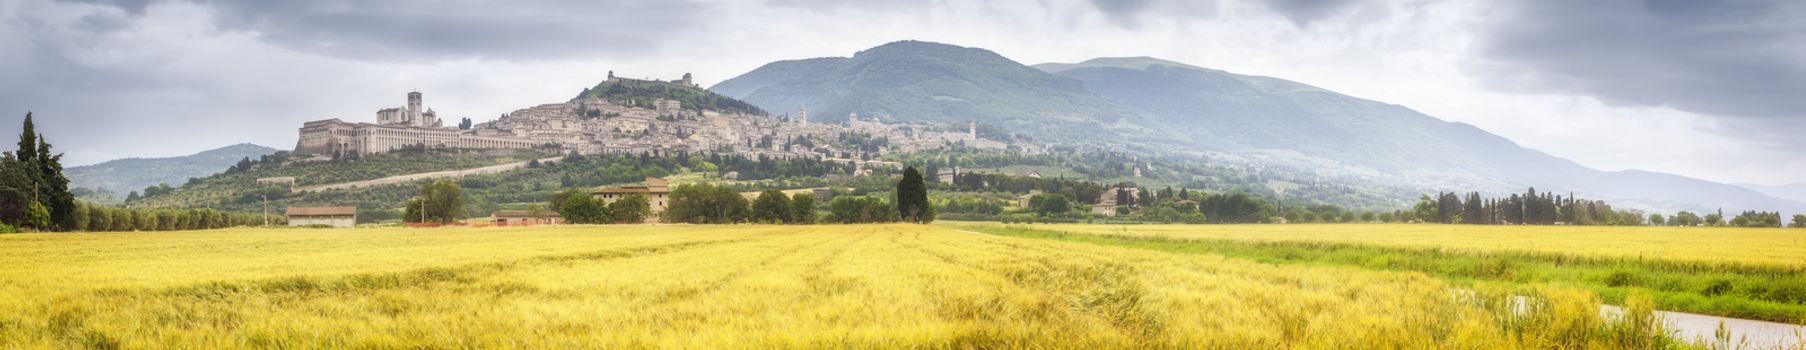 An image of a view to Assisi in Italy Umbria golden field panorama